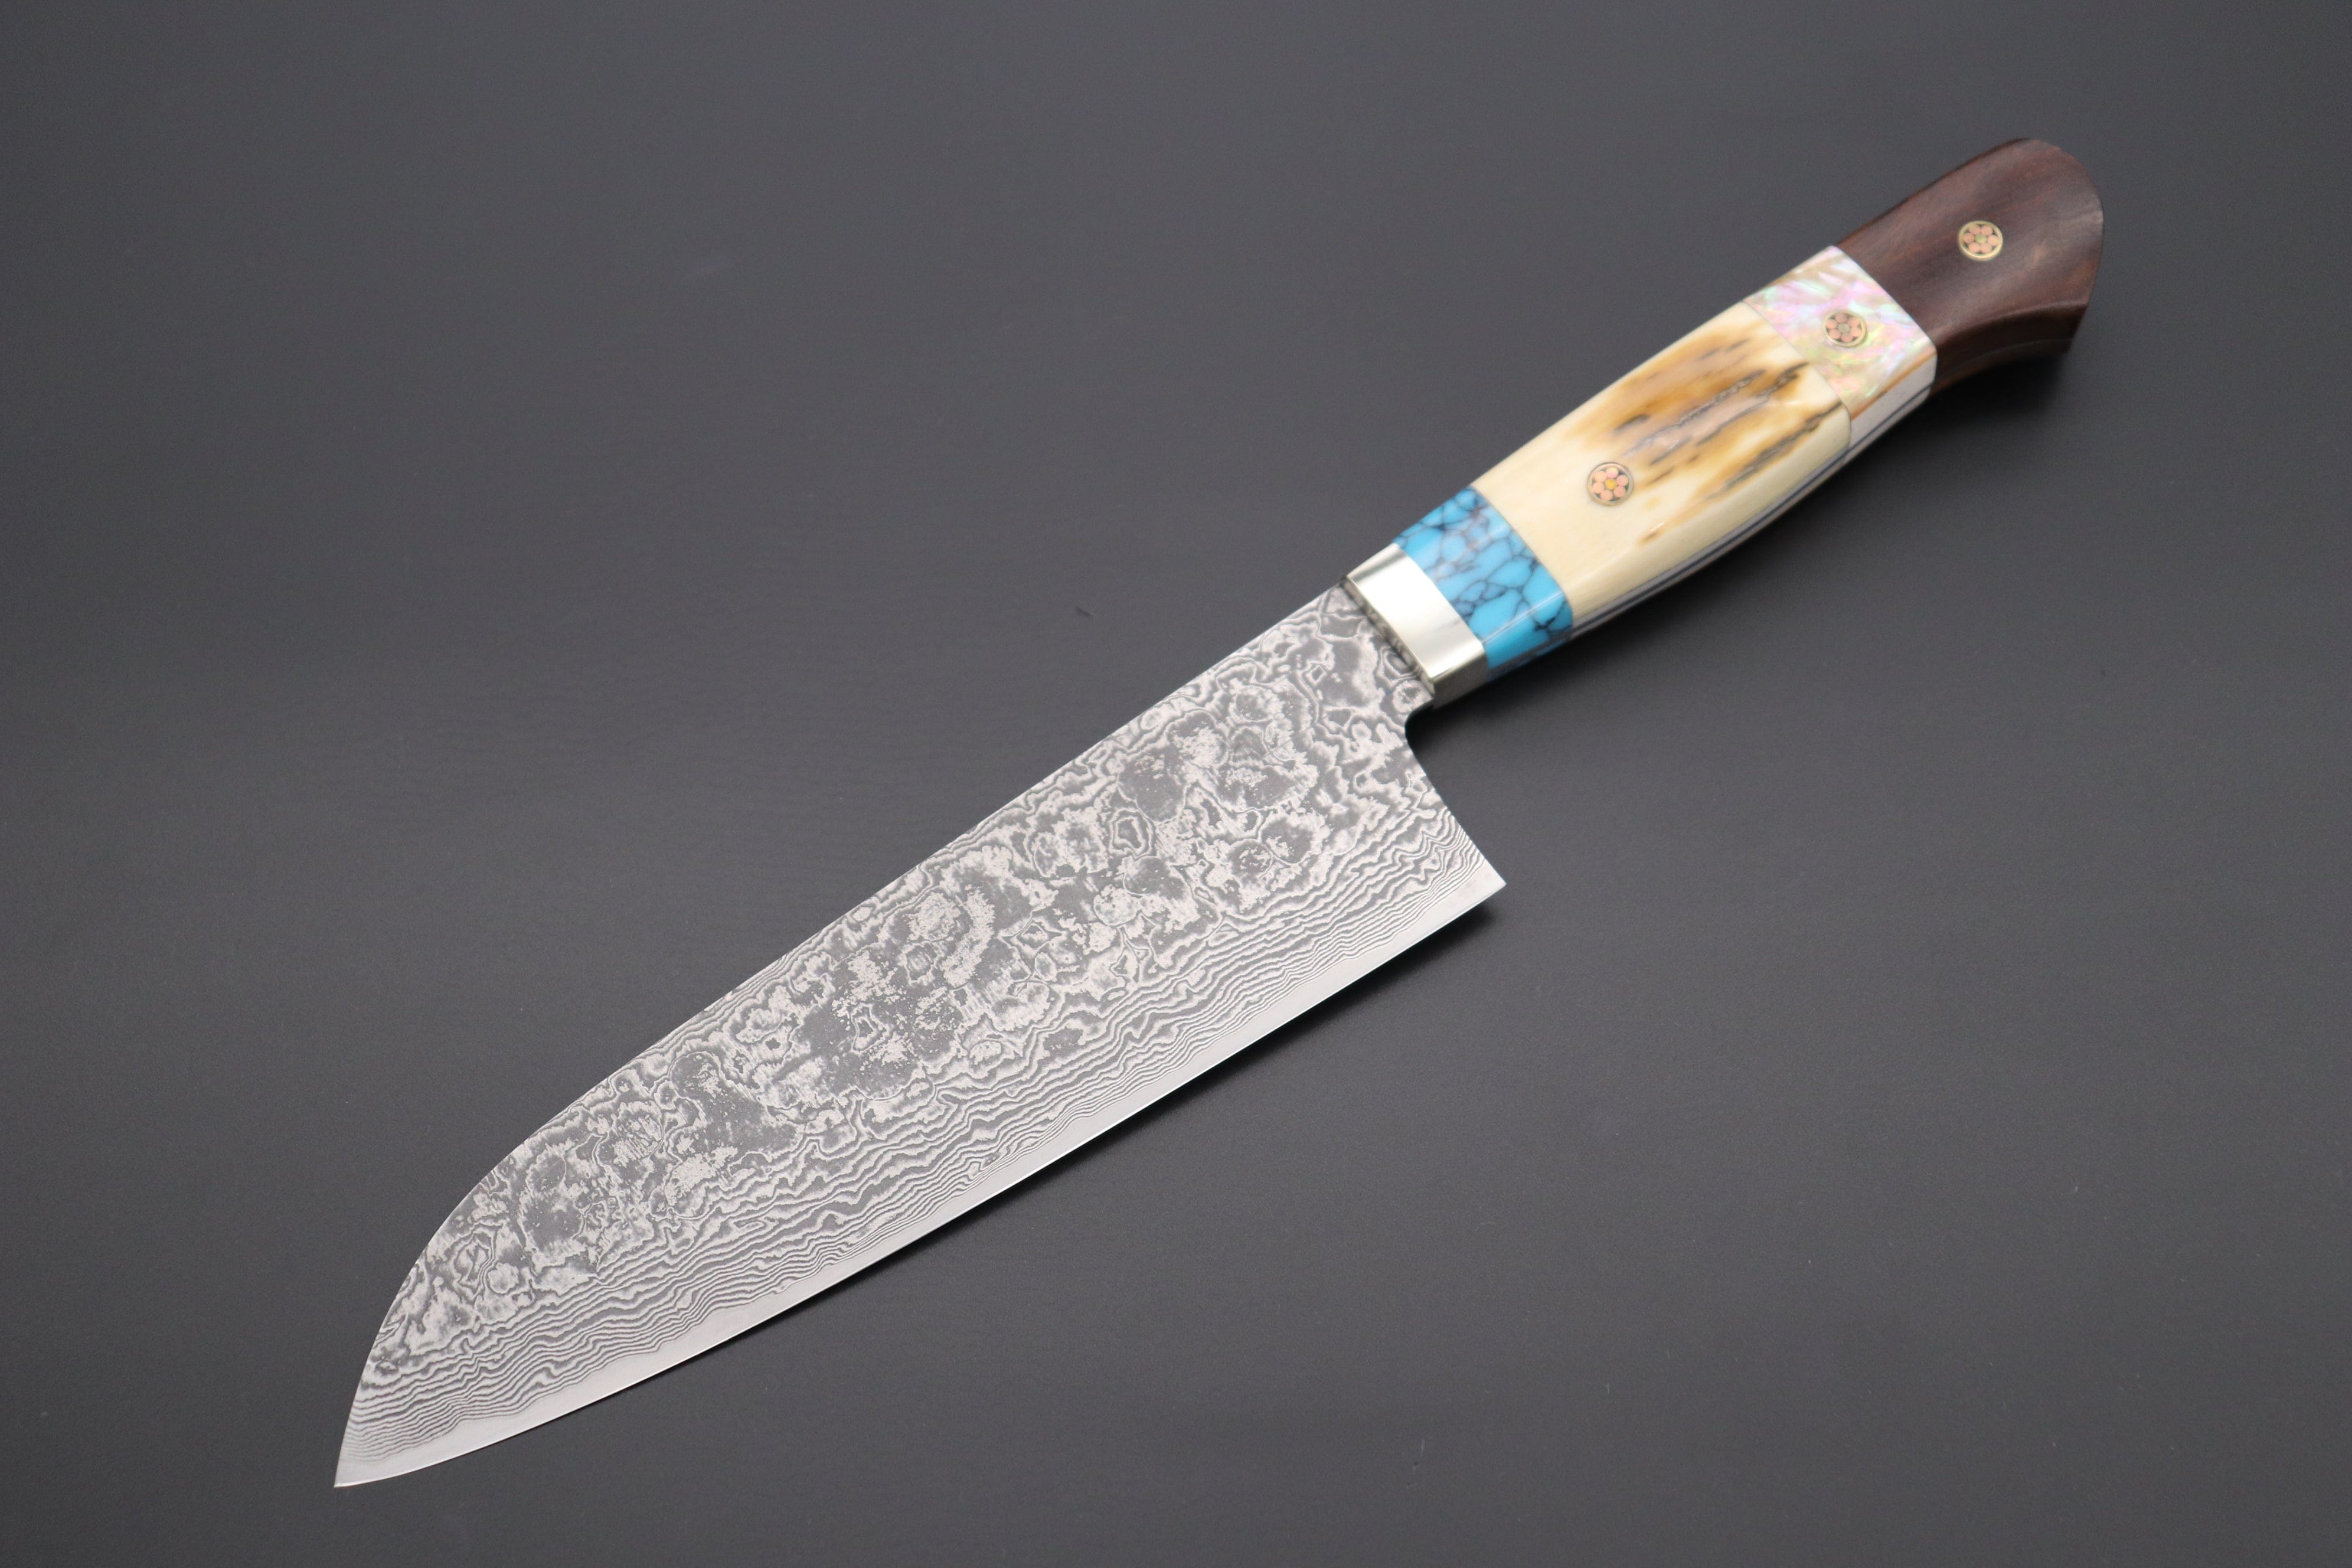  Large chef knife VG10 damascus chef knives turquoise knife  gemstone composite handles, kitchen knives : Handmade Products